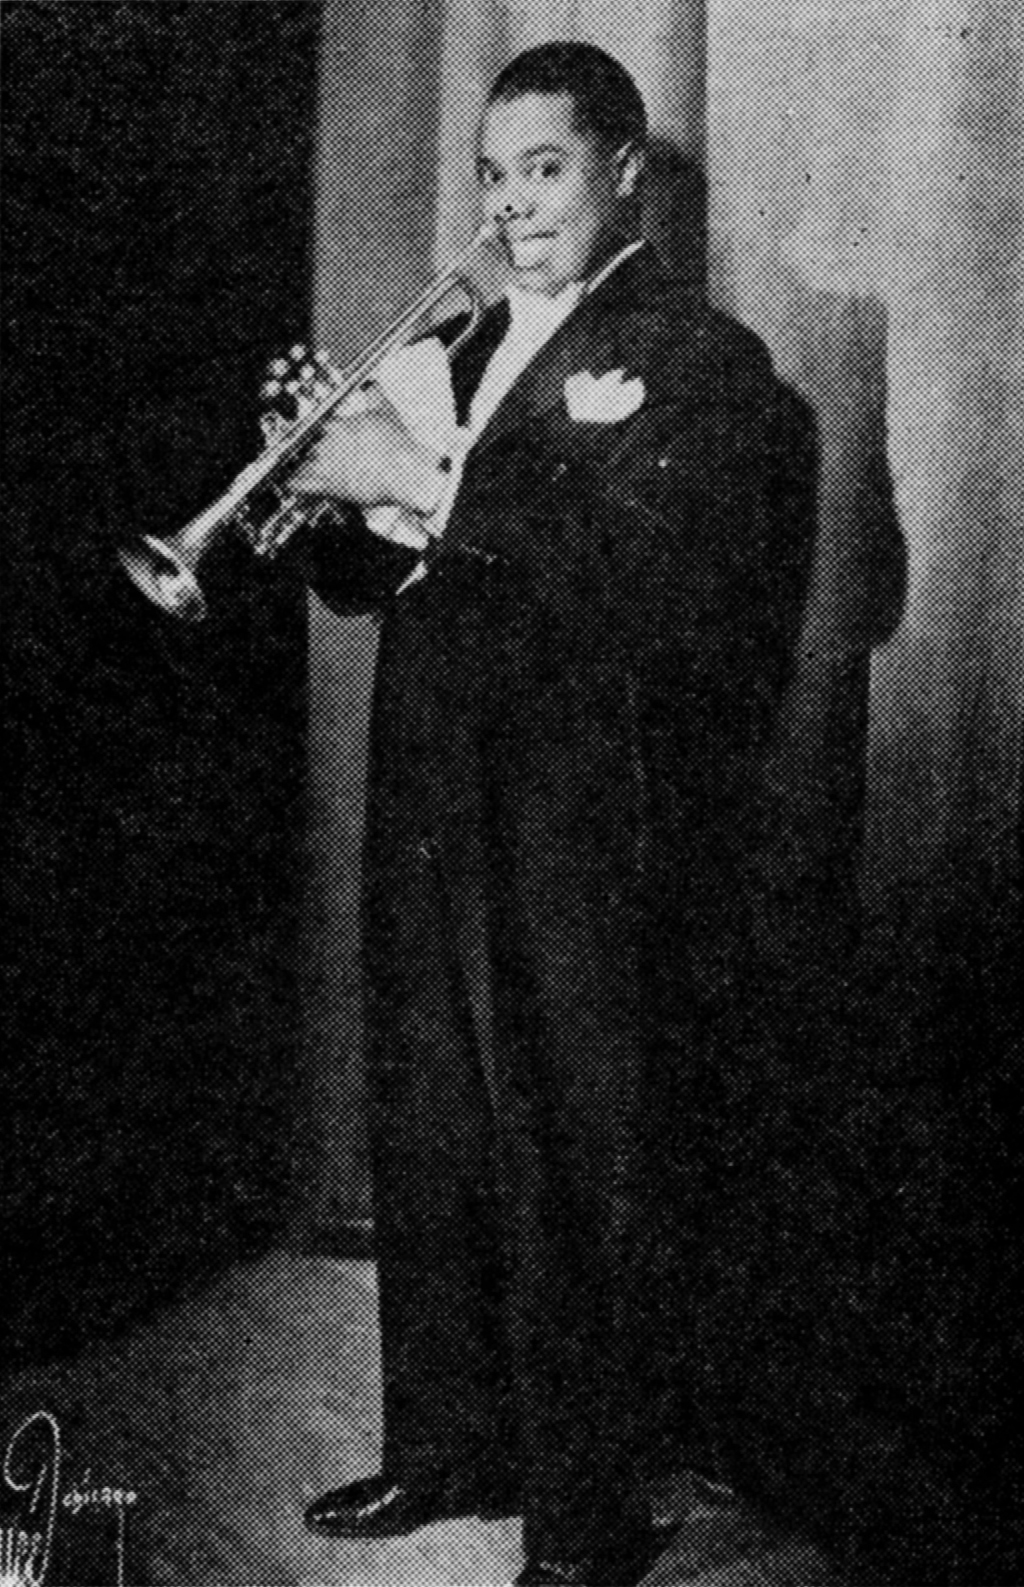 photograph of Louis Armstrong holding his trumpet